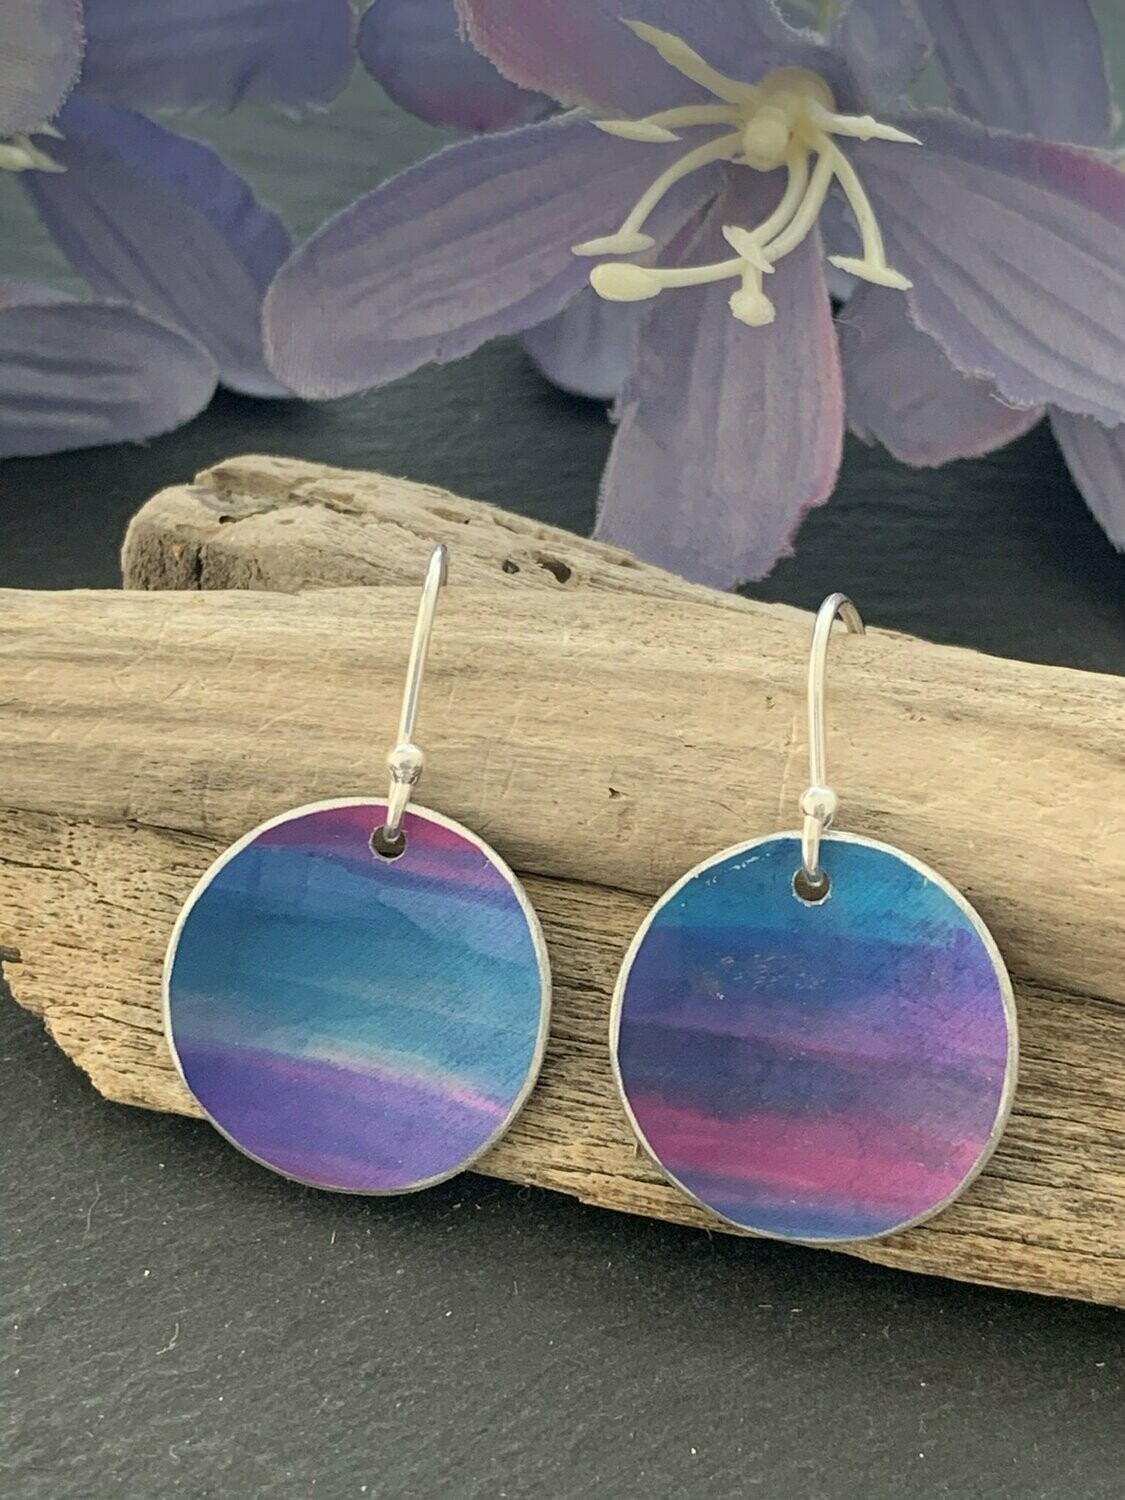 Printed Aluminium and sterling silver drop earrings - Blue, pink and Purple stripe